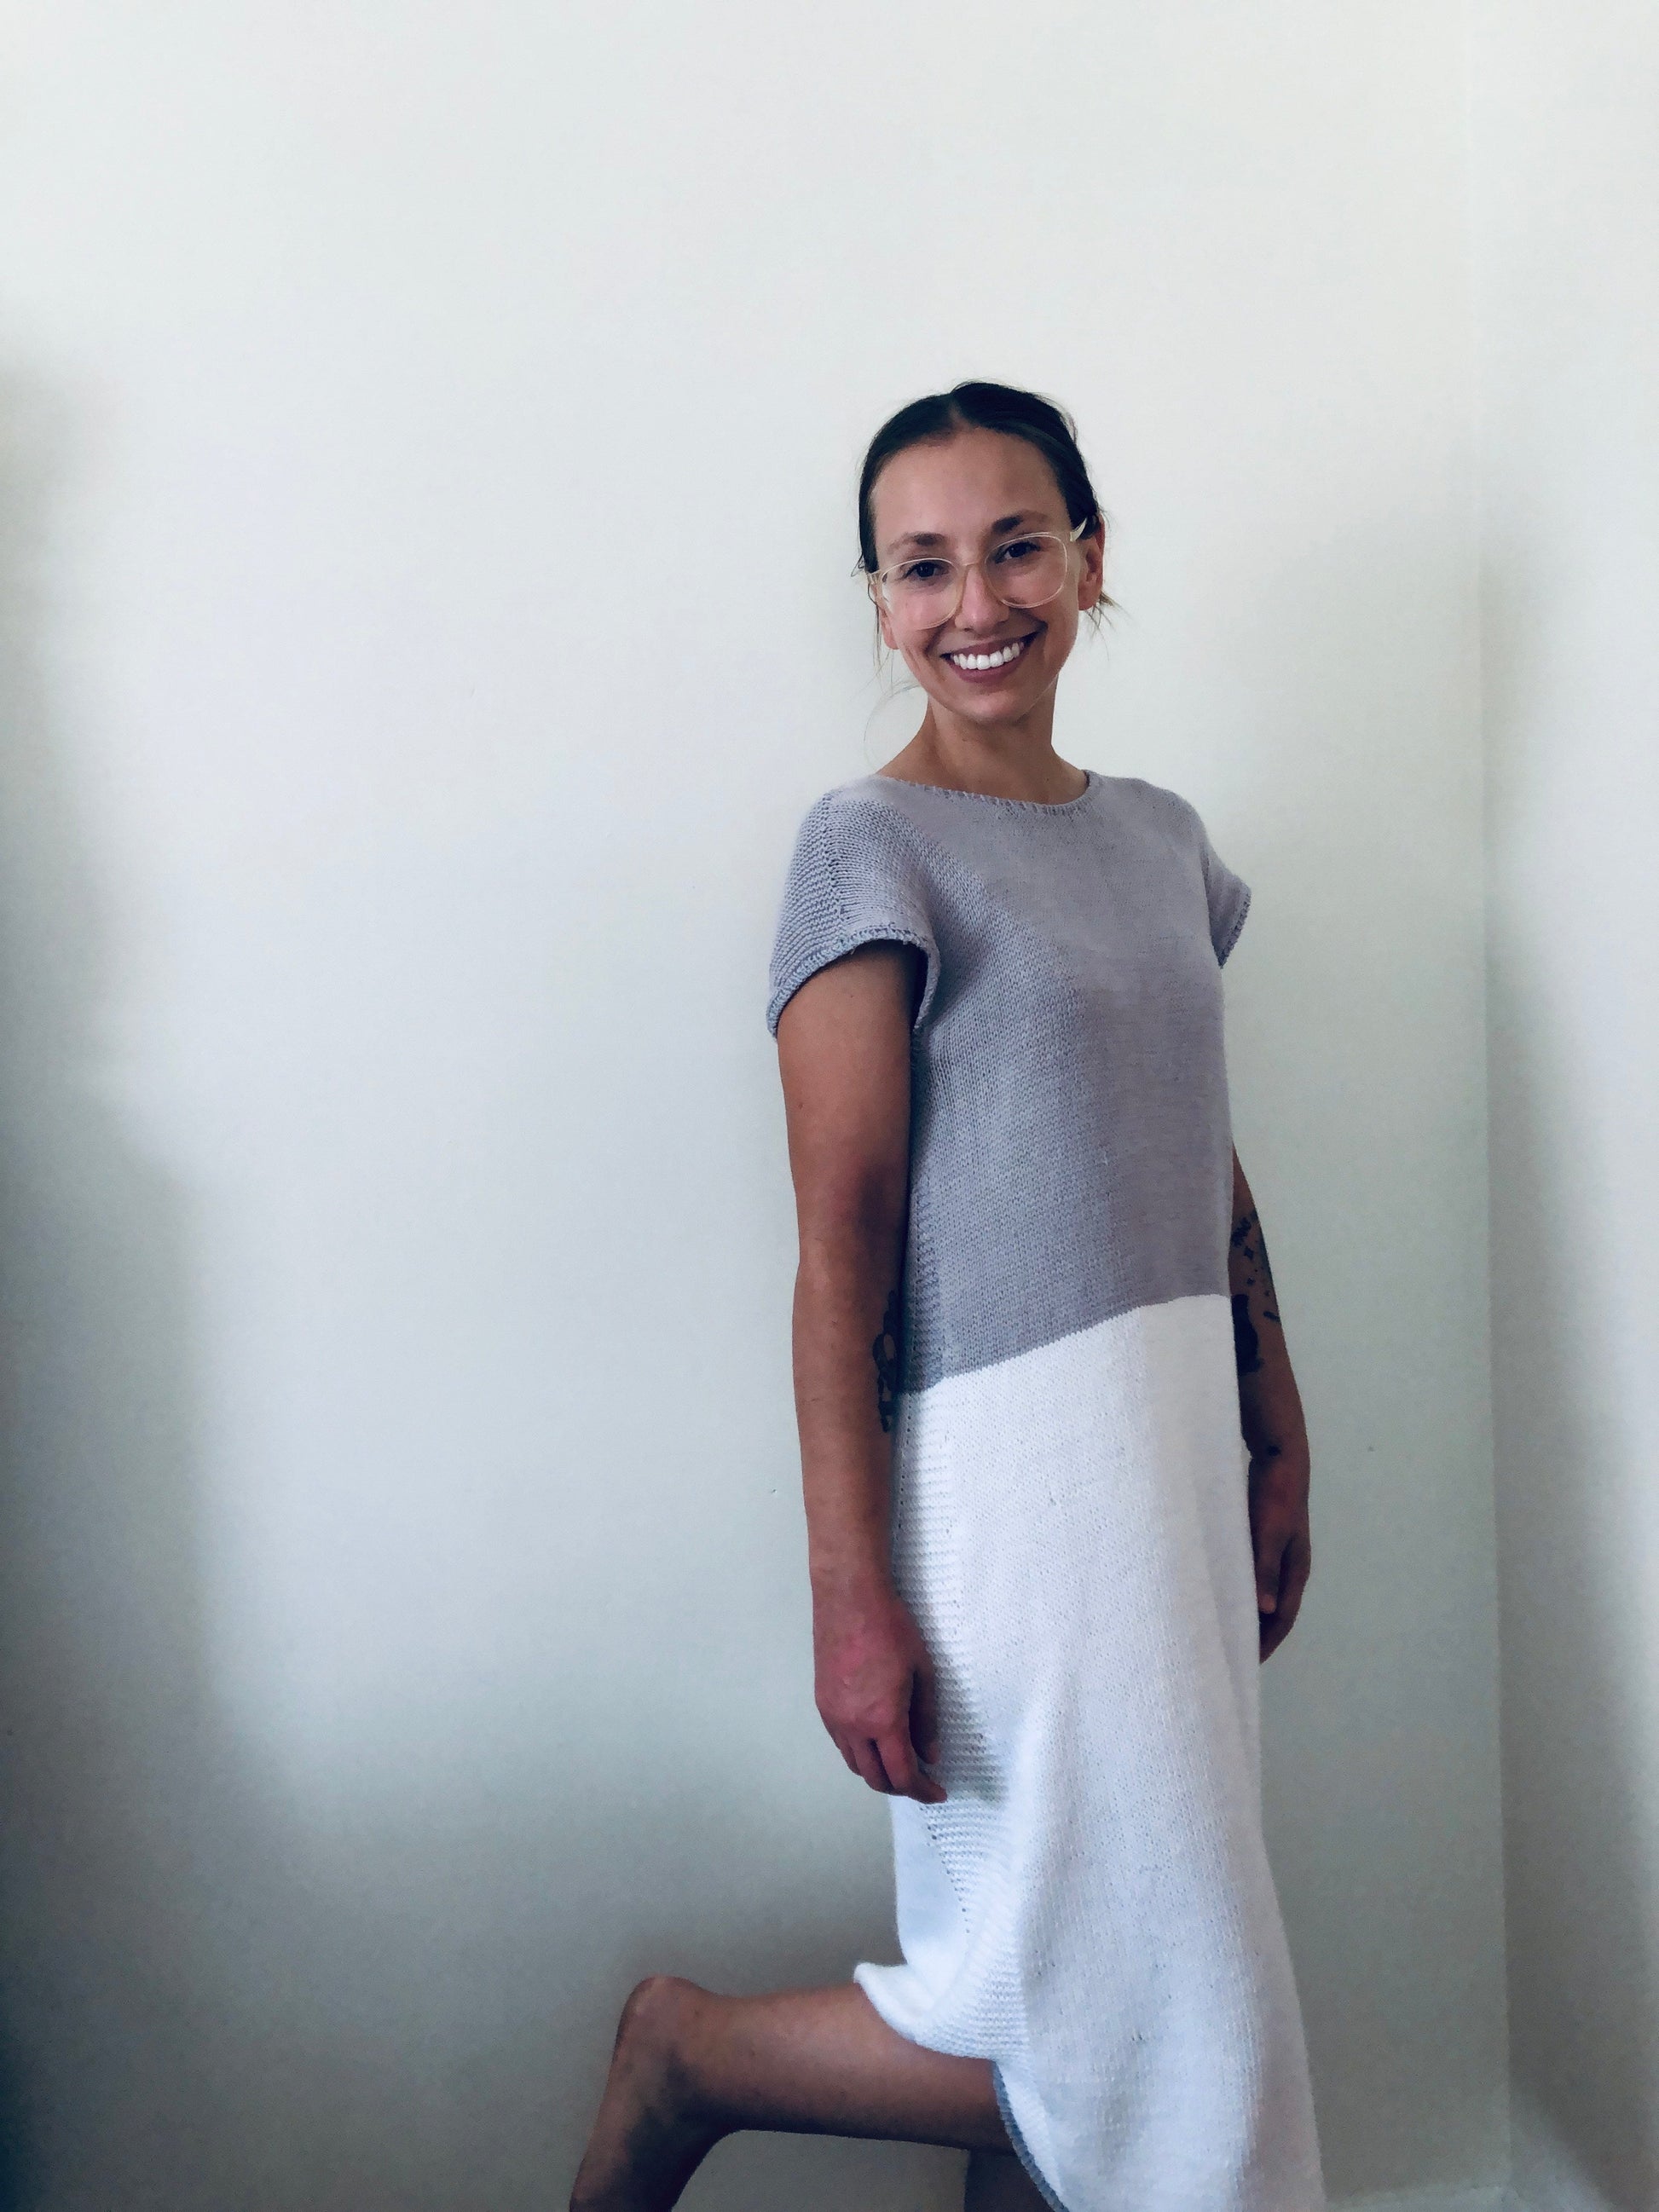 Seen from a three quarter angle, a woman smiles at the camera. She wears a grey and white hand knit dress.